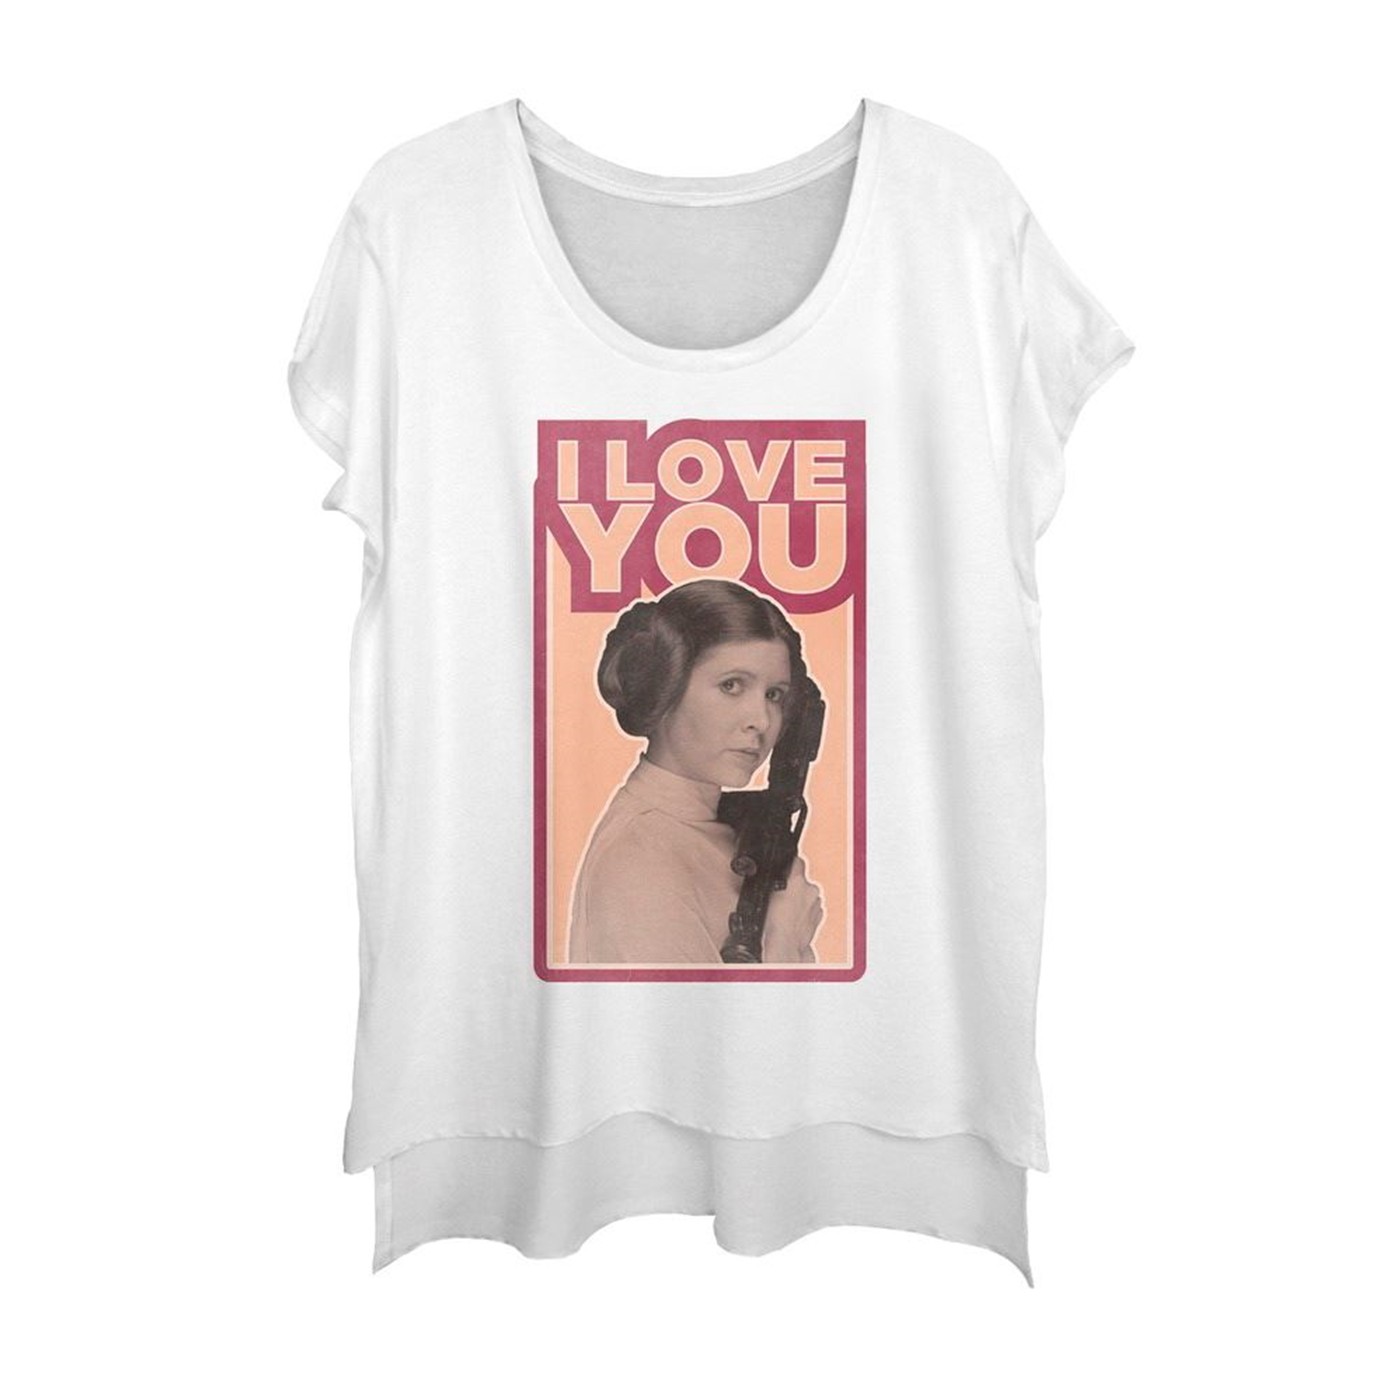 Star Wars Princess Leia Quote I Love You Women's Festival Scoop Neck T-Shirt